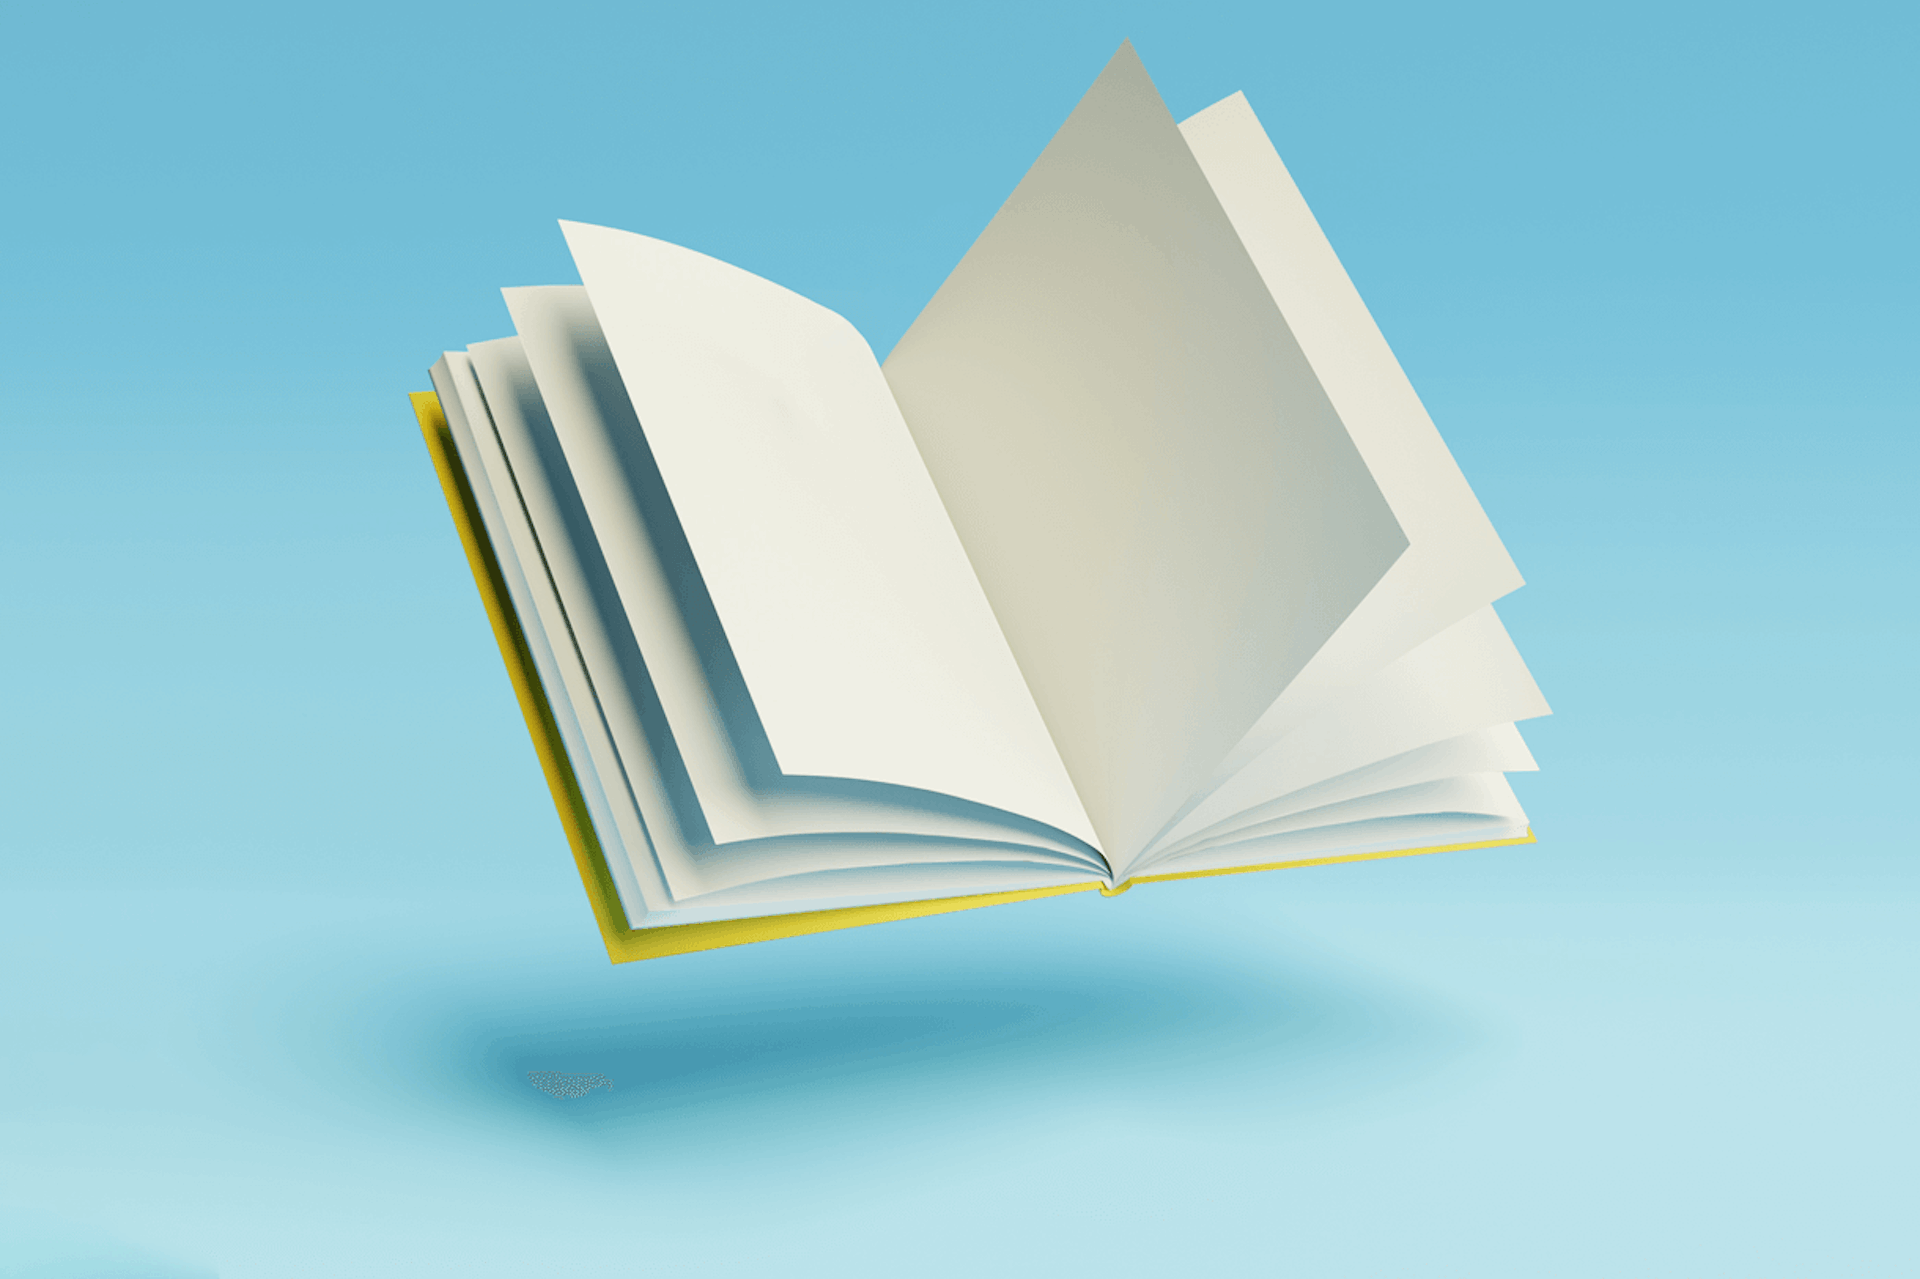 Illustration of an open magazine with blank pages on a light blue background. List of the most popular US magazines.